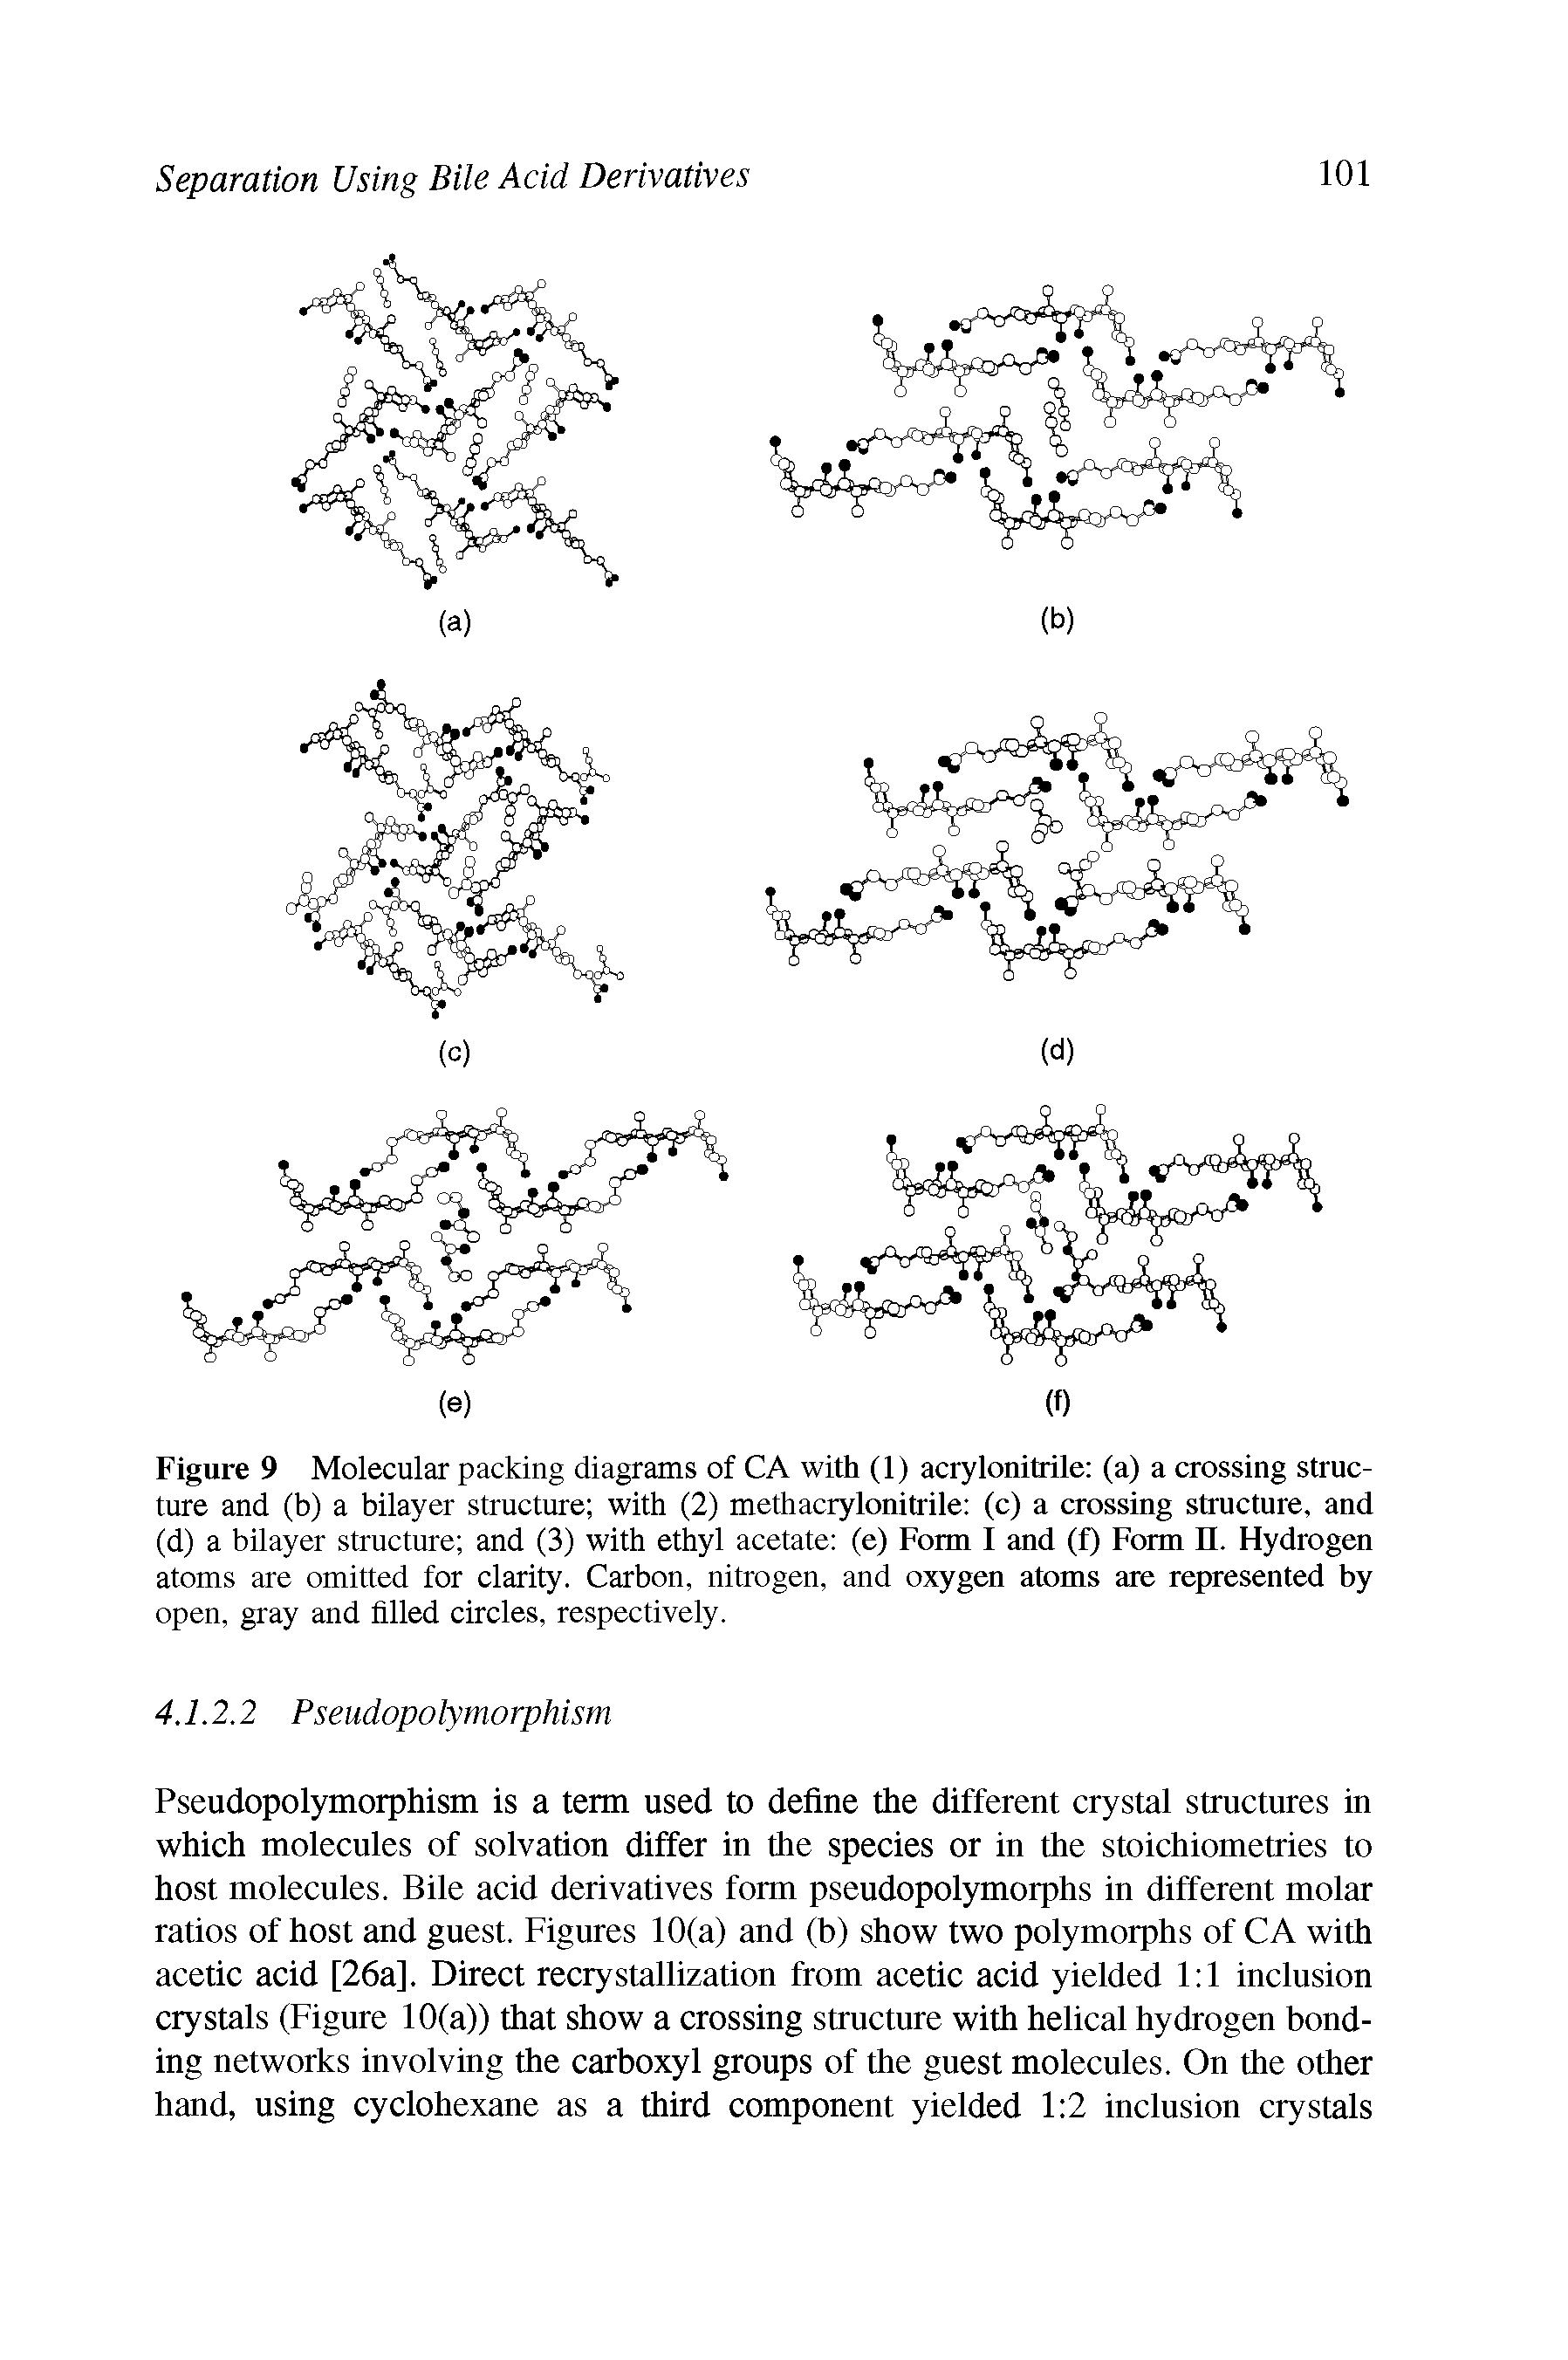 Figure 9 Molecular packing diagrams of CA with (1) acrylonitrile (a) a crossing structure and (b) a bilayer structure with (2) methacrylonitrile (c) a crossing structure, and (d) a bilayer structure and (3) with ethyl acetate (e) Form I and (f) Form II. Hydrogen atoms are omitted for clarity. Carbon, nitrogen, and oxygen atoms are represented by open, gray and filled circles, respectively.